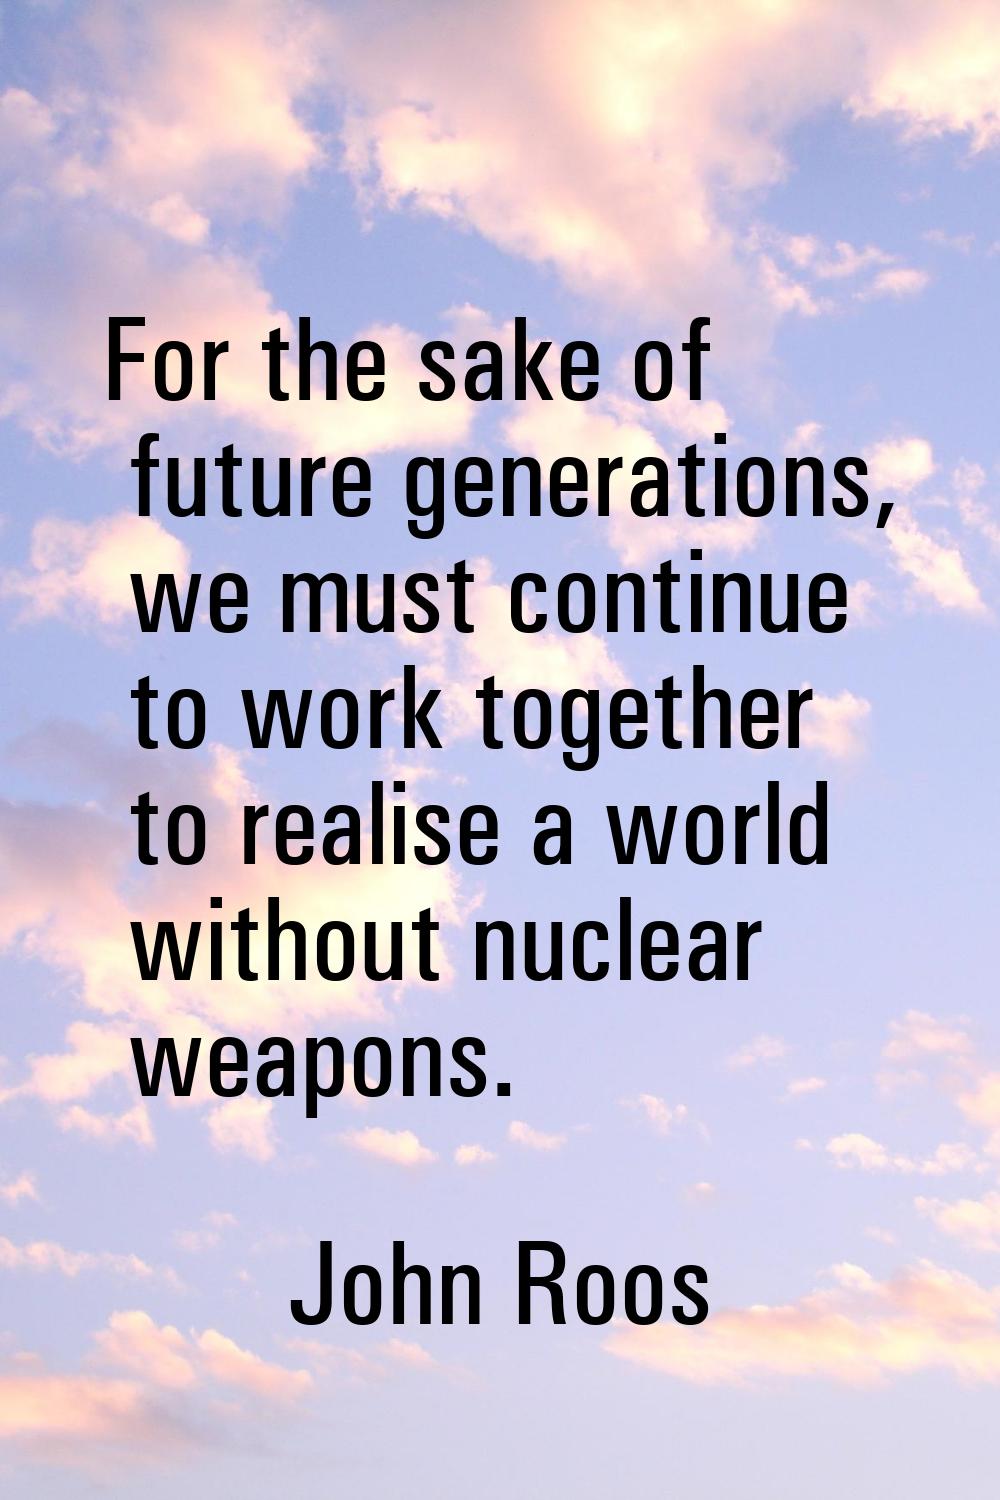 For the sake of future generations, we must continue to work together to realise a world without nu